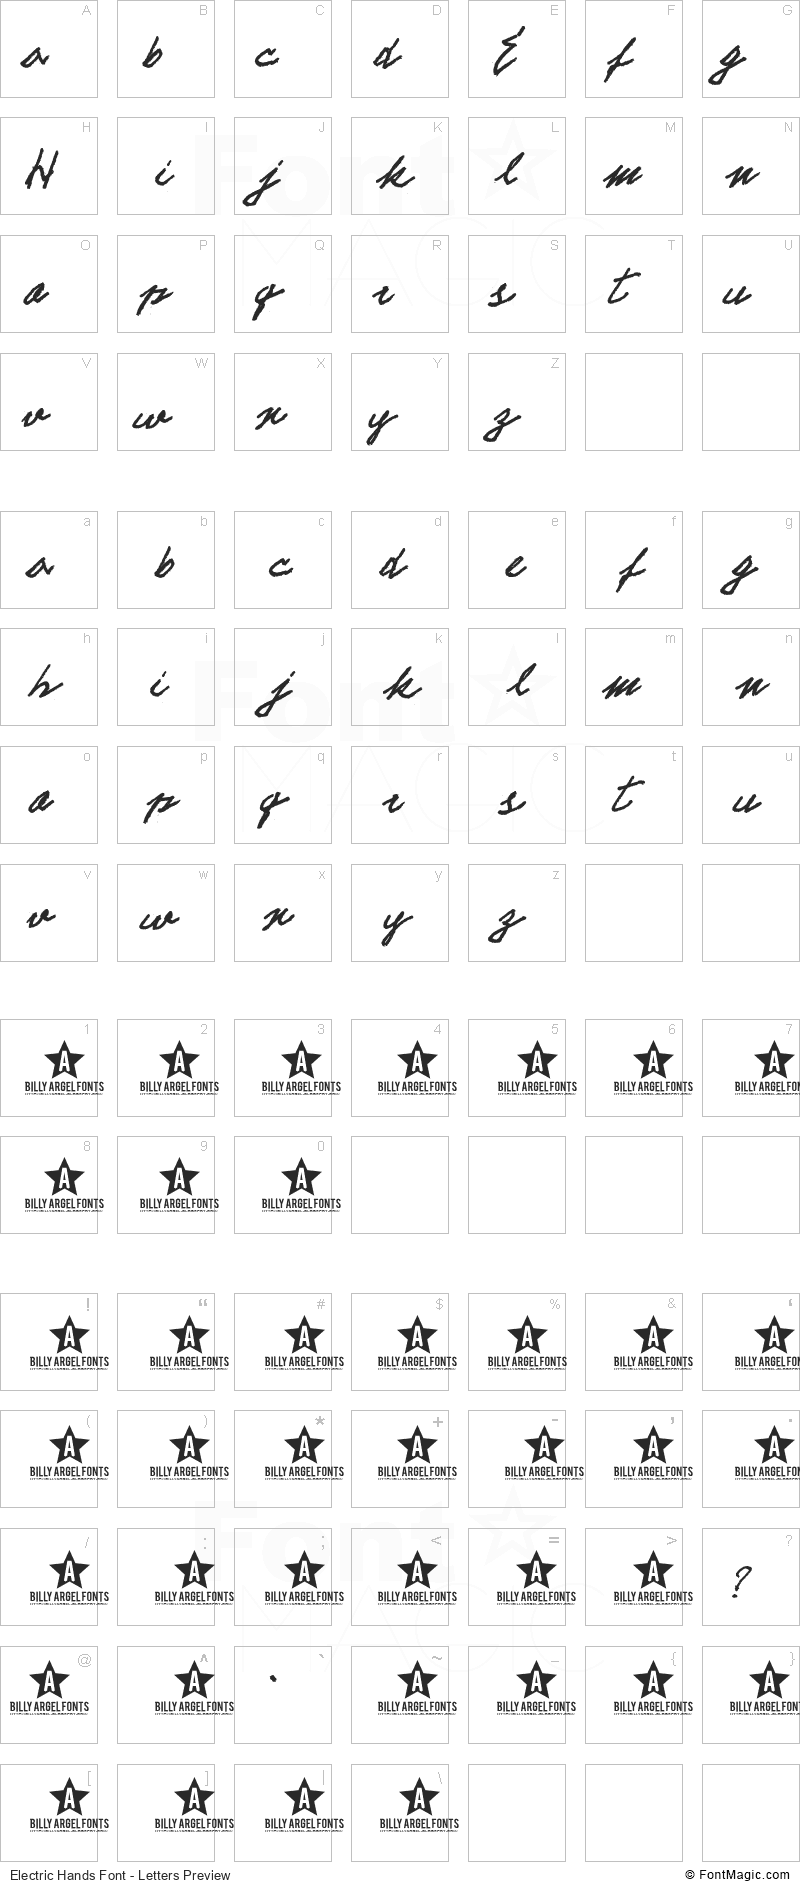 Electric Hands Font - All Latters Preview Chart